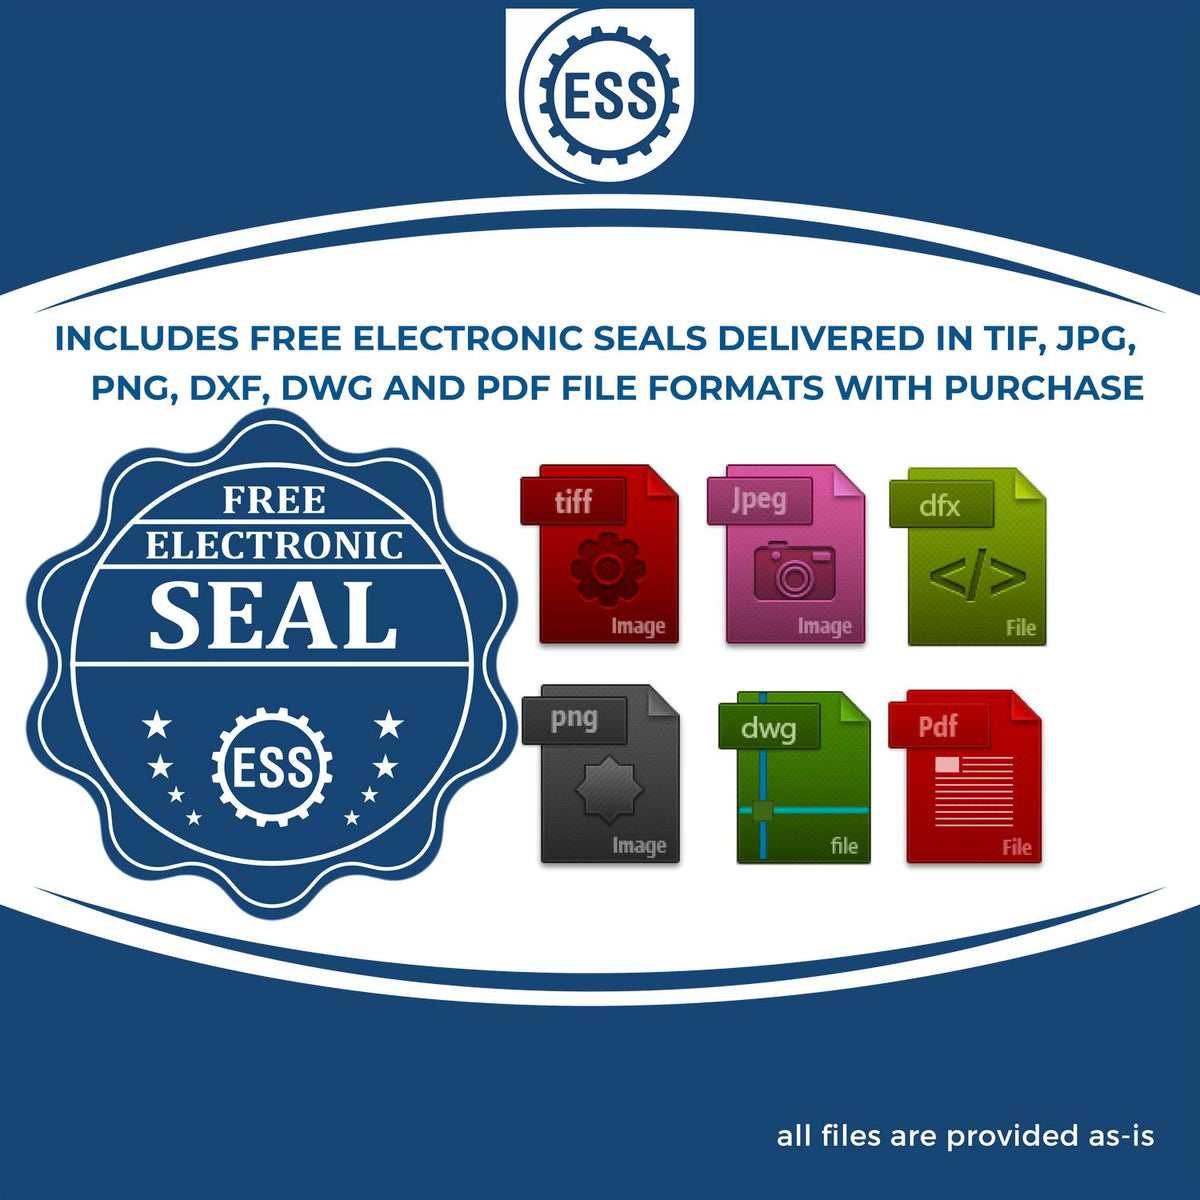 An infographic for the free electronic seal for the Slim Pre-Inked Illinois Architect Seal Stamp illustrating the different file type icons such as DXF, DWG, TIF, JPG and PNG.